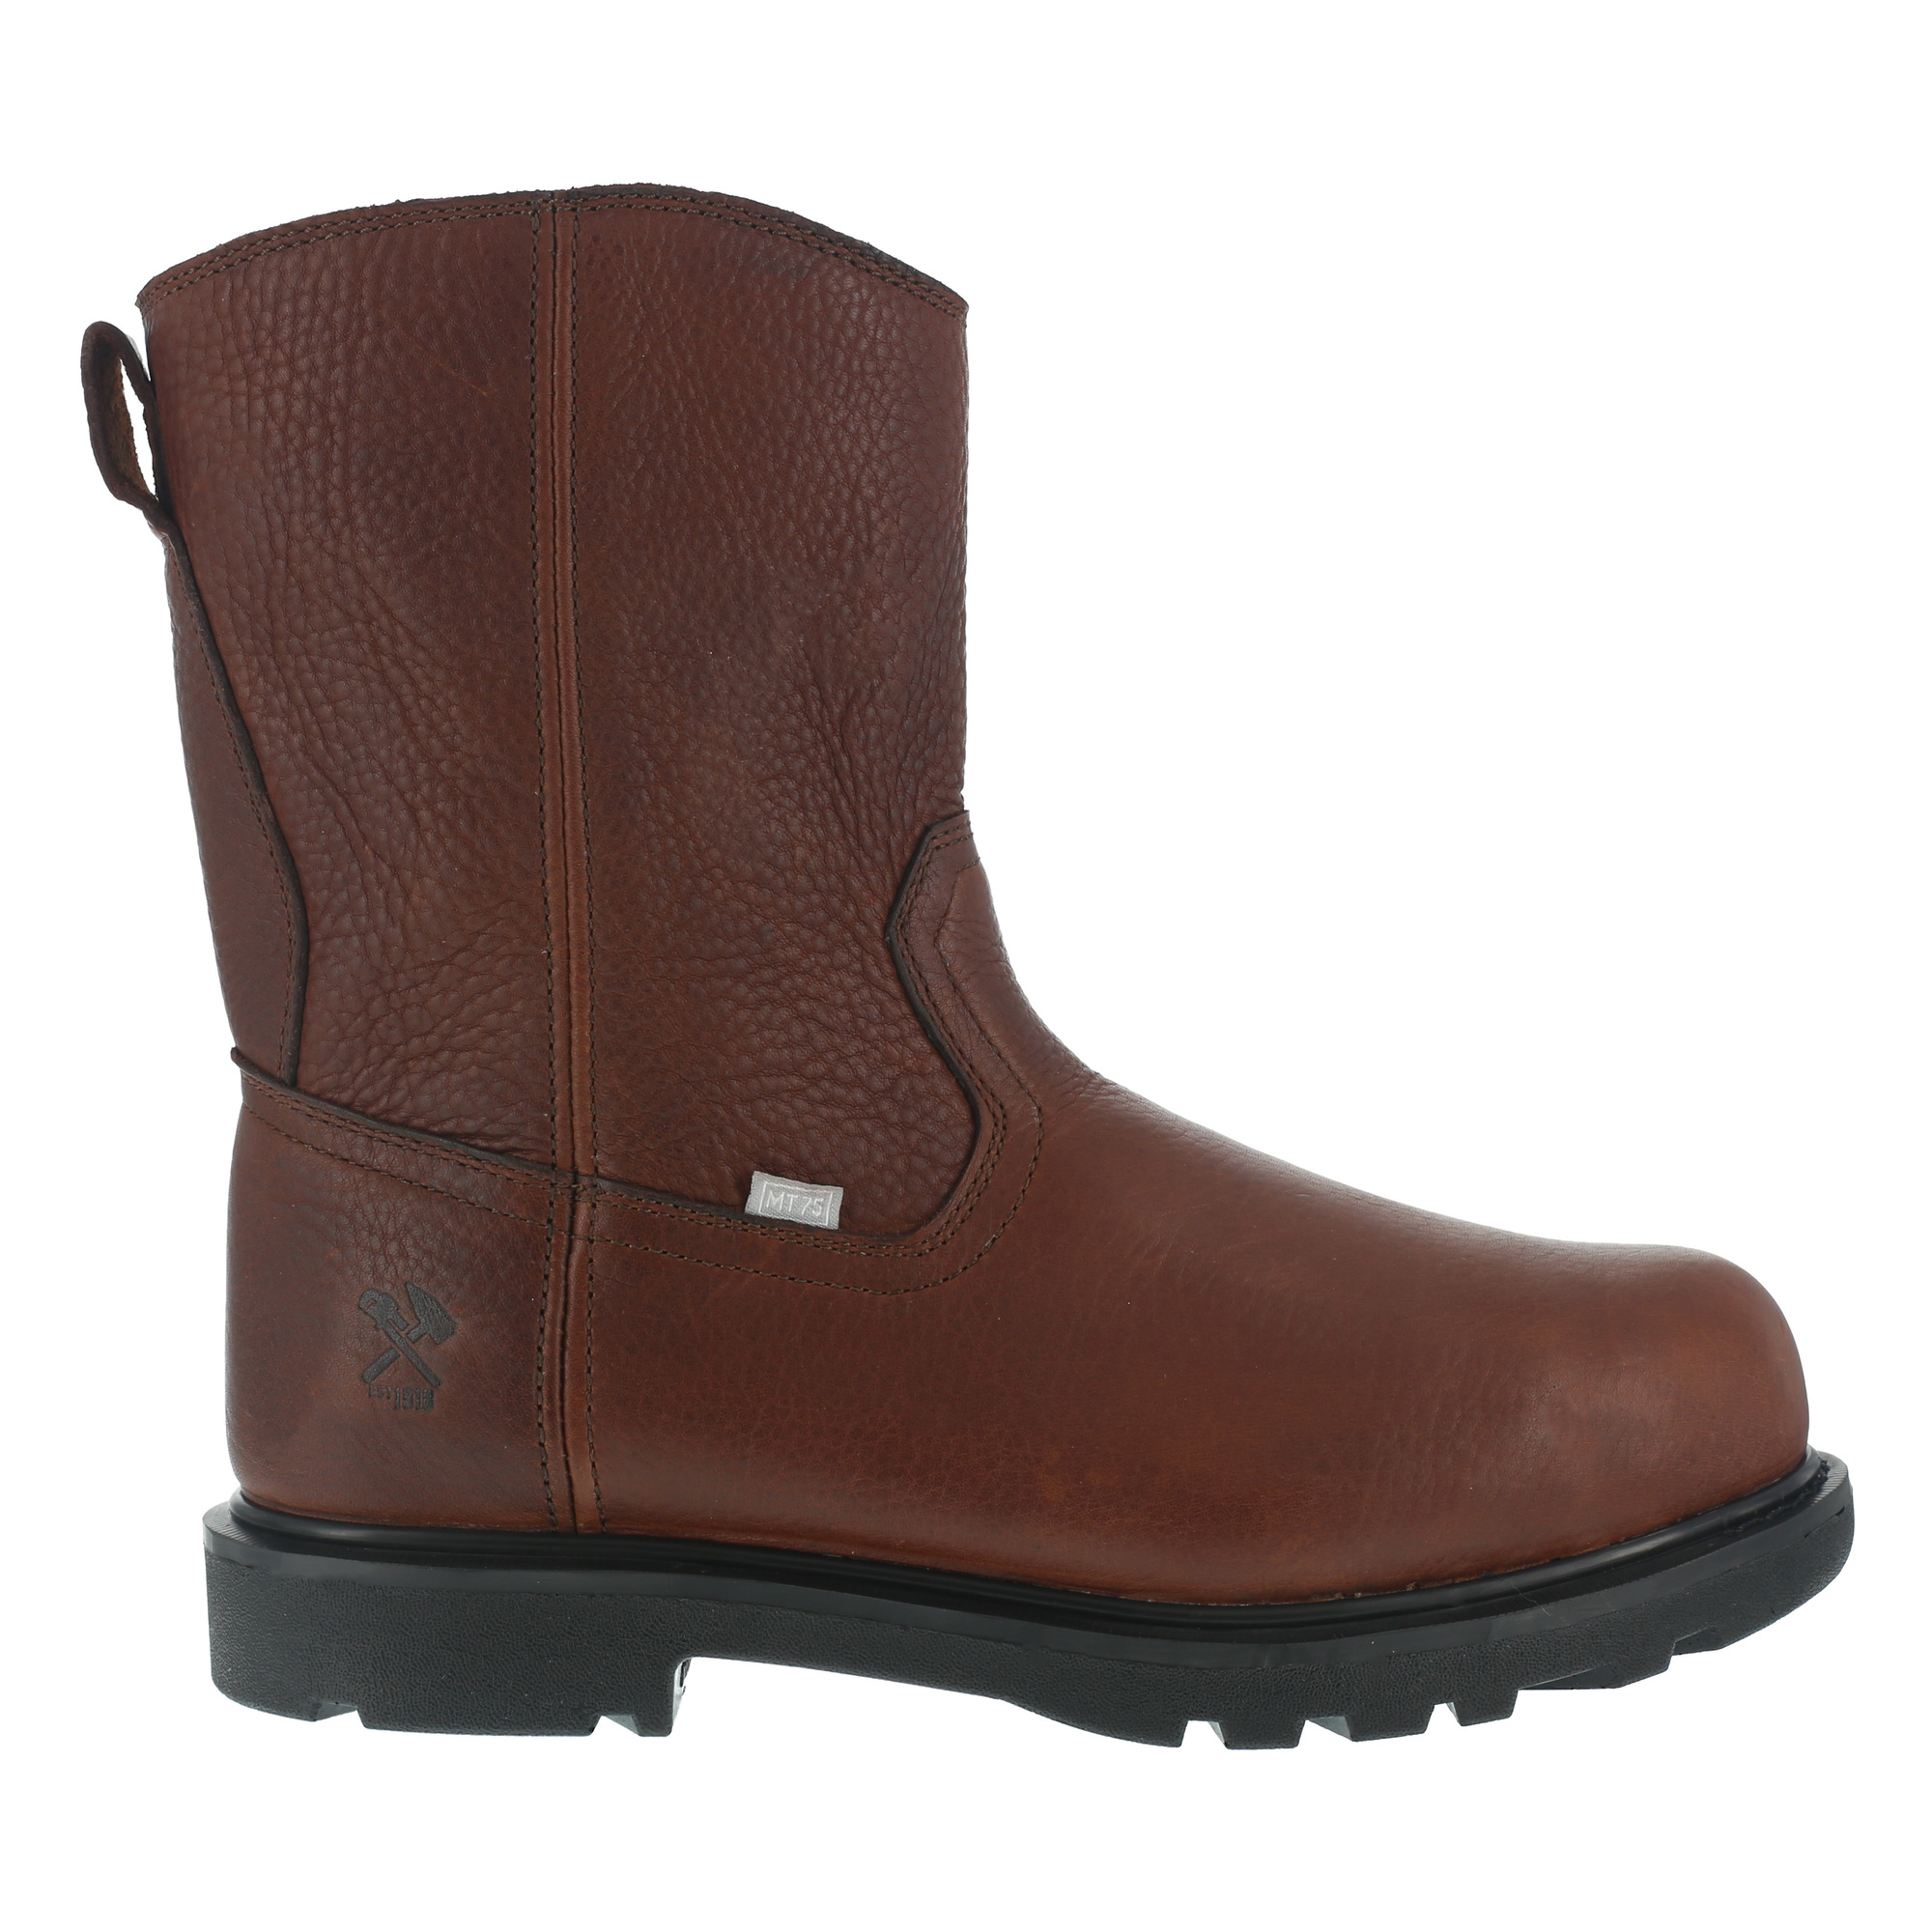 Iron Age, 10Inch Wellington Work Boot, Size 11 1/2, Width Wide, Color Brown, Model IA0195 -  IA0195-W-11.5